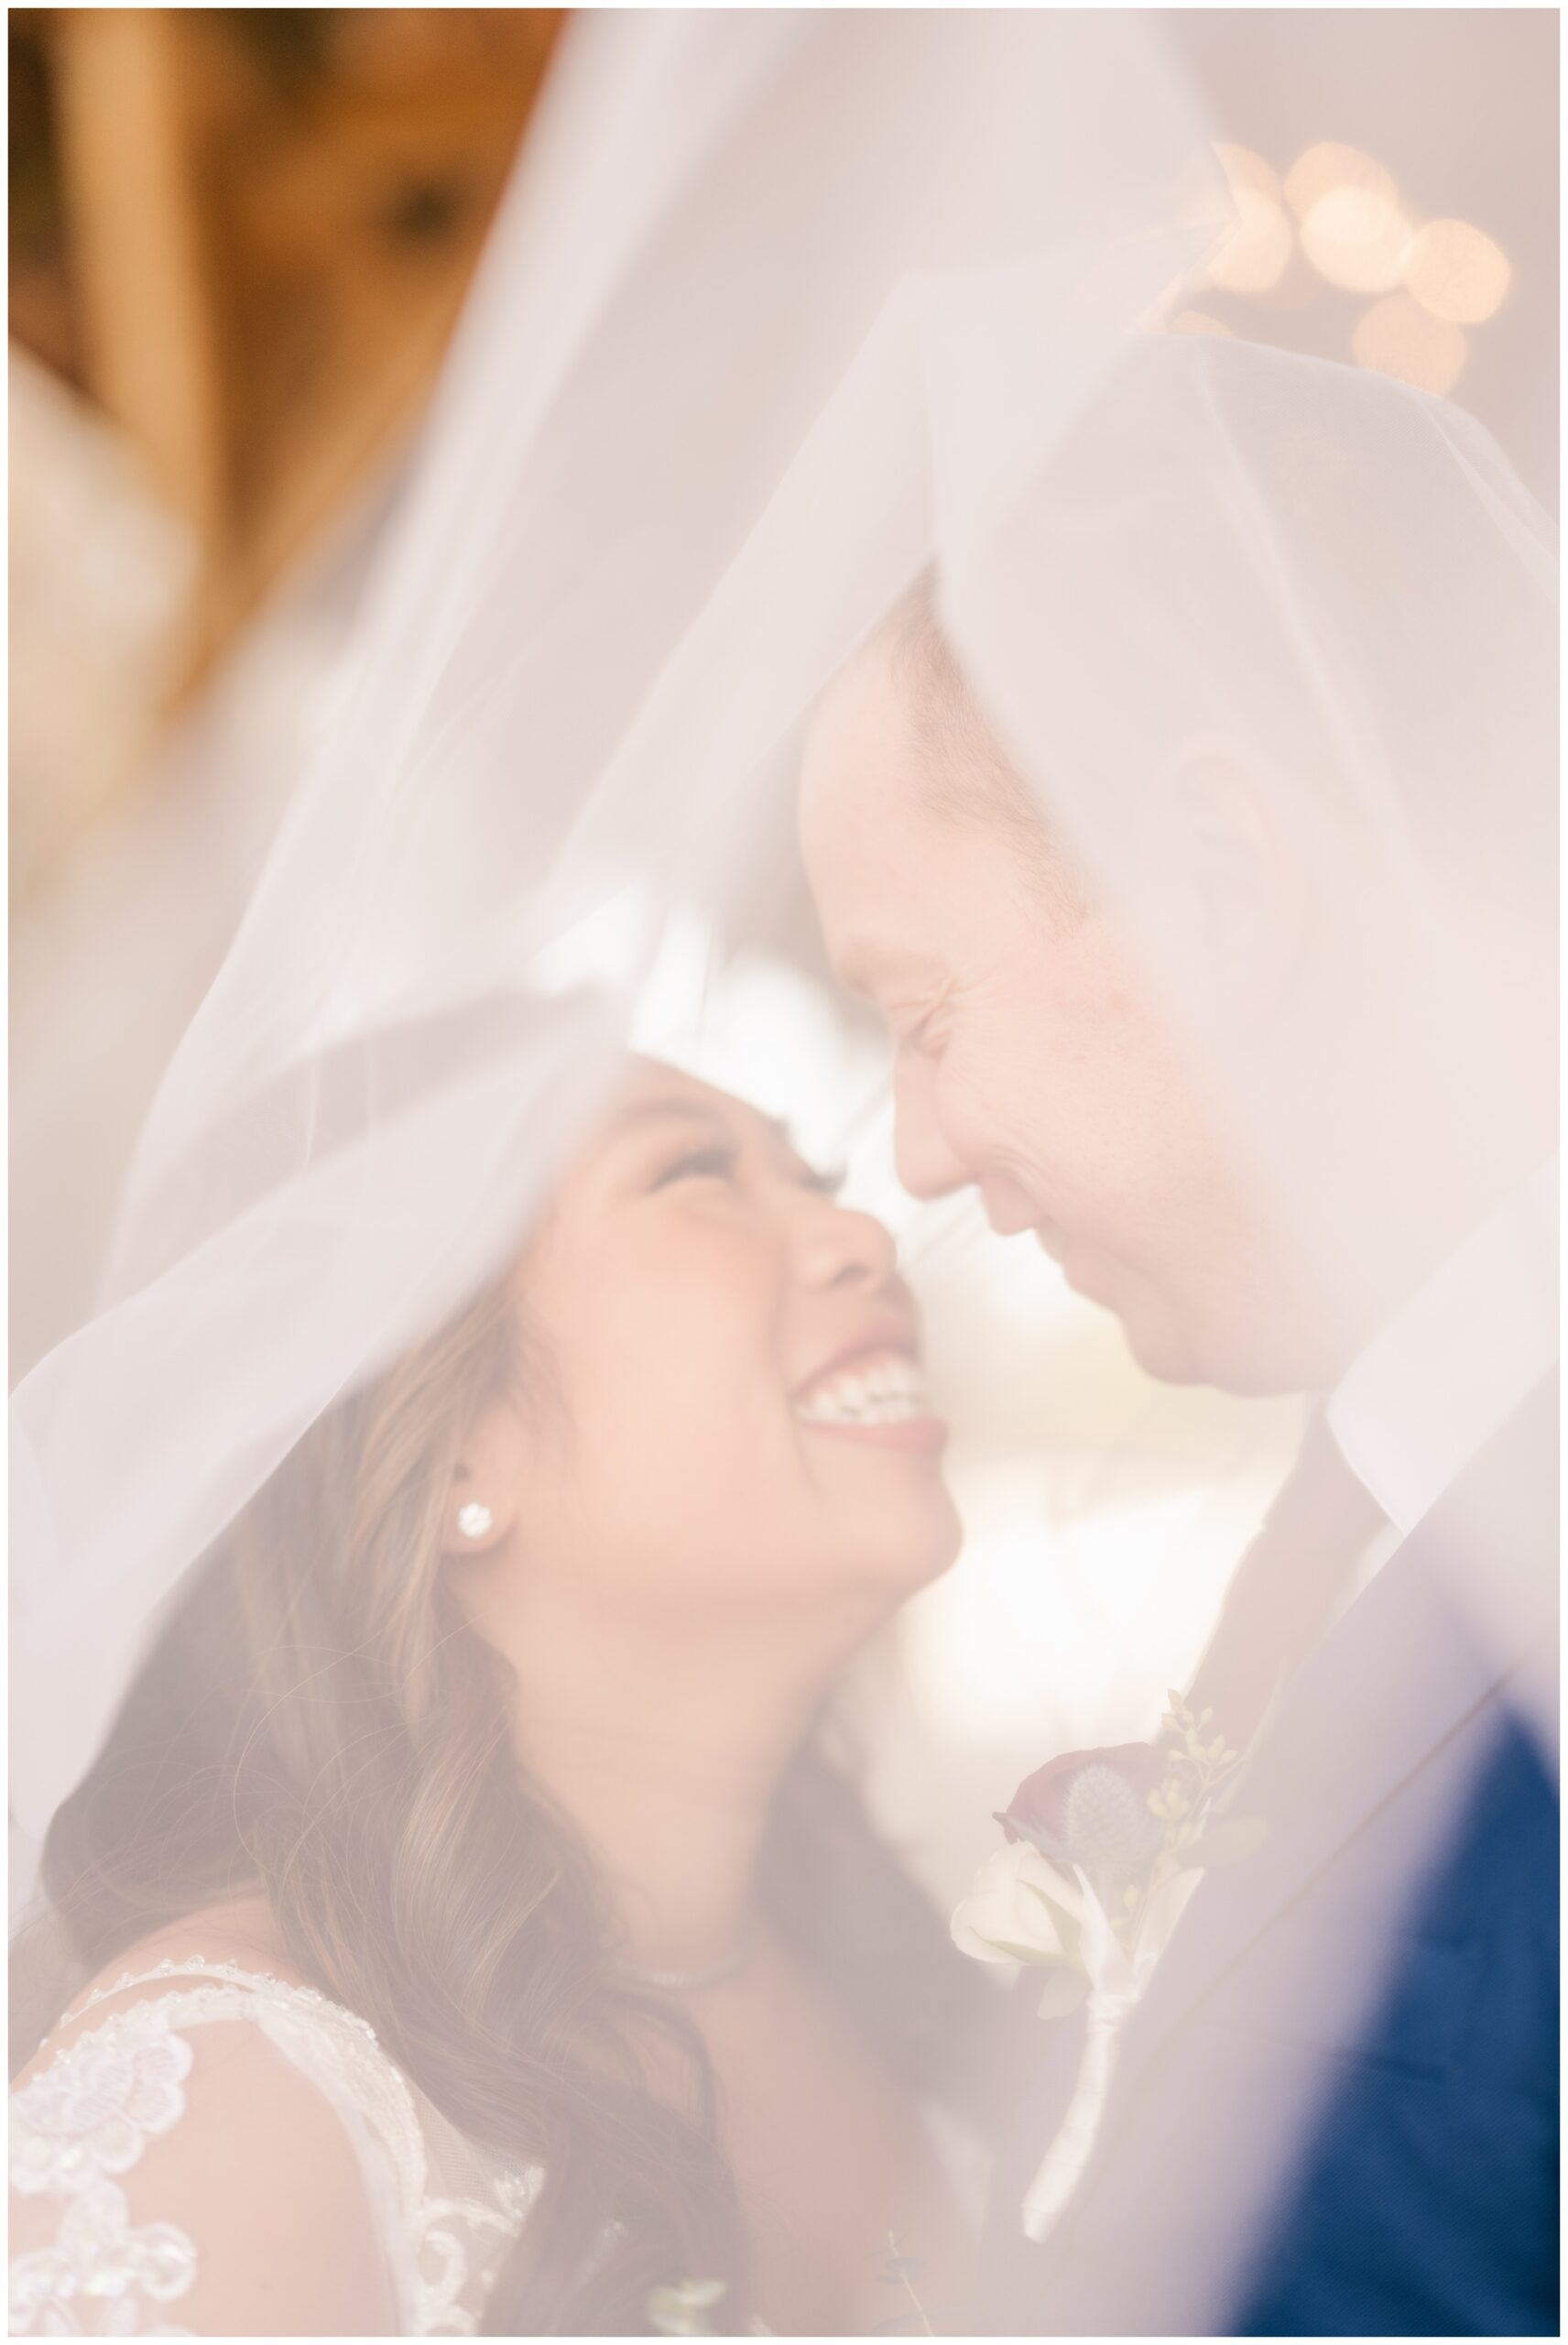 Soft Portrait of Bride and Groom under veil by Relics of Rainbows Photo.